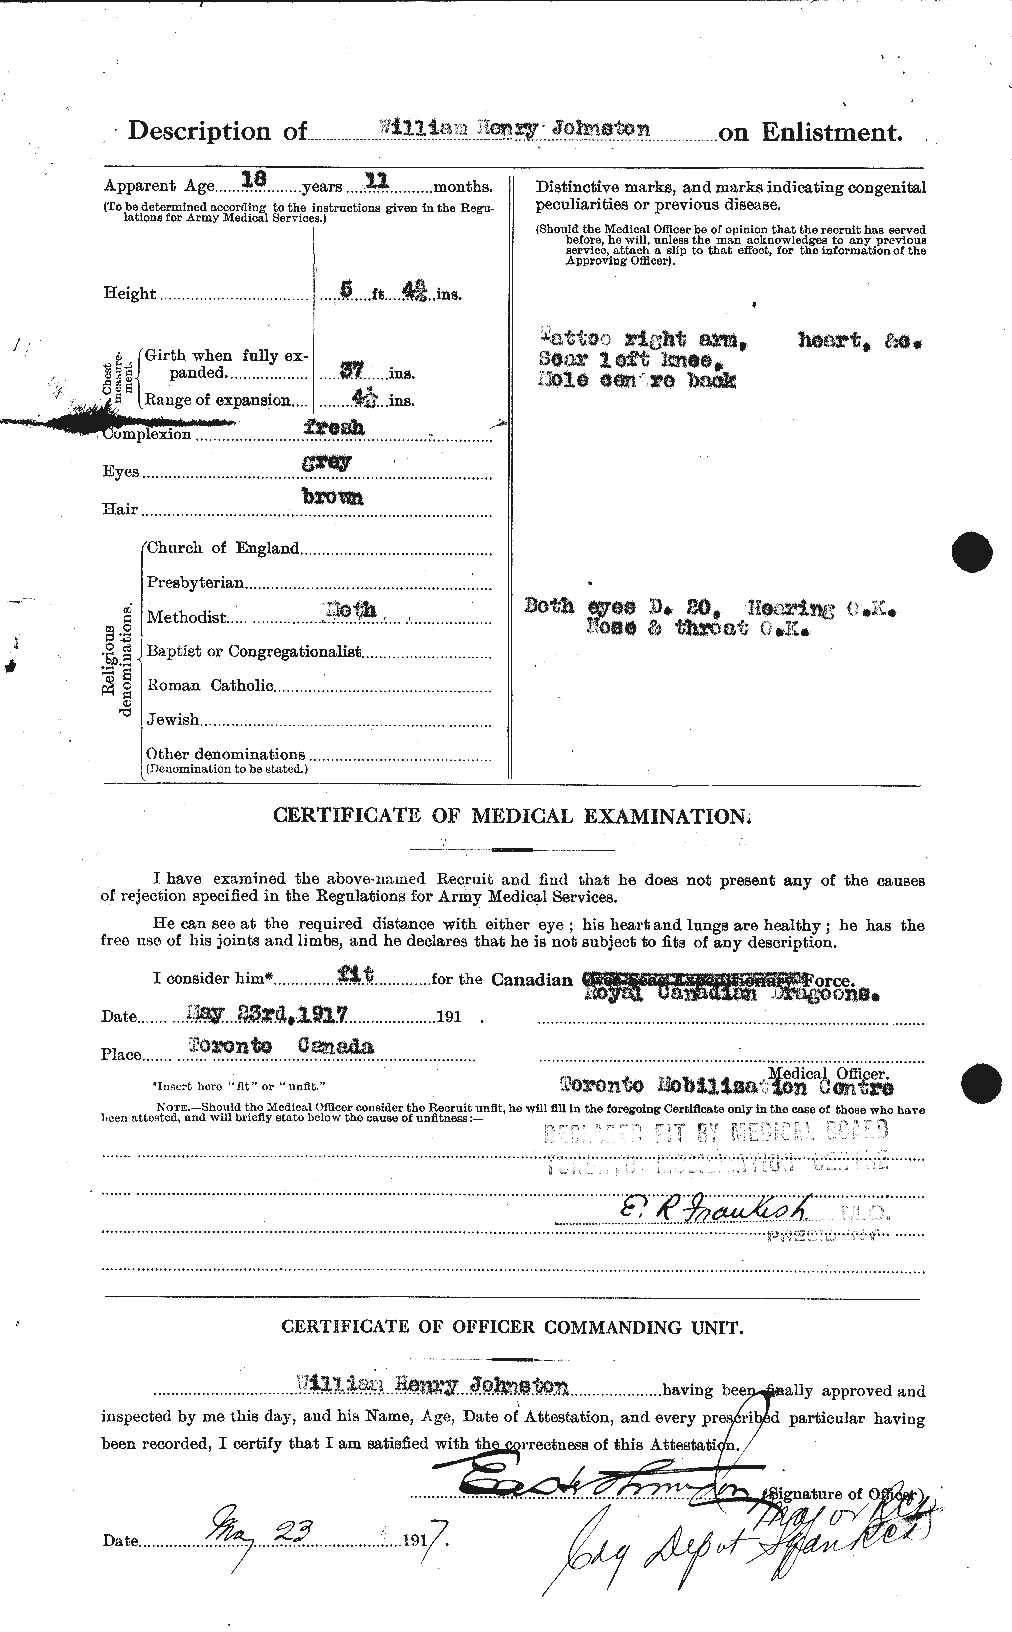 Personnel Records of the First World War - CEF 427338b